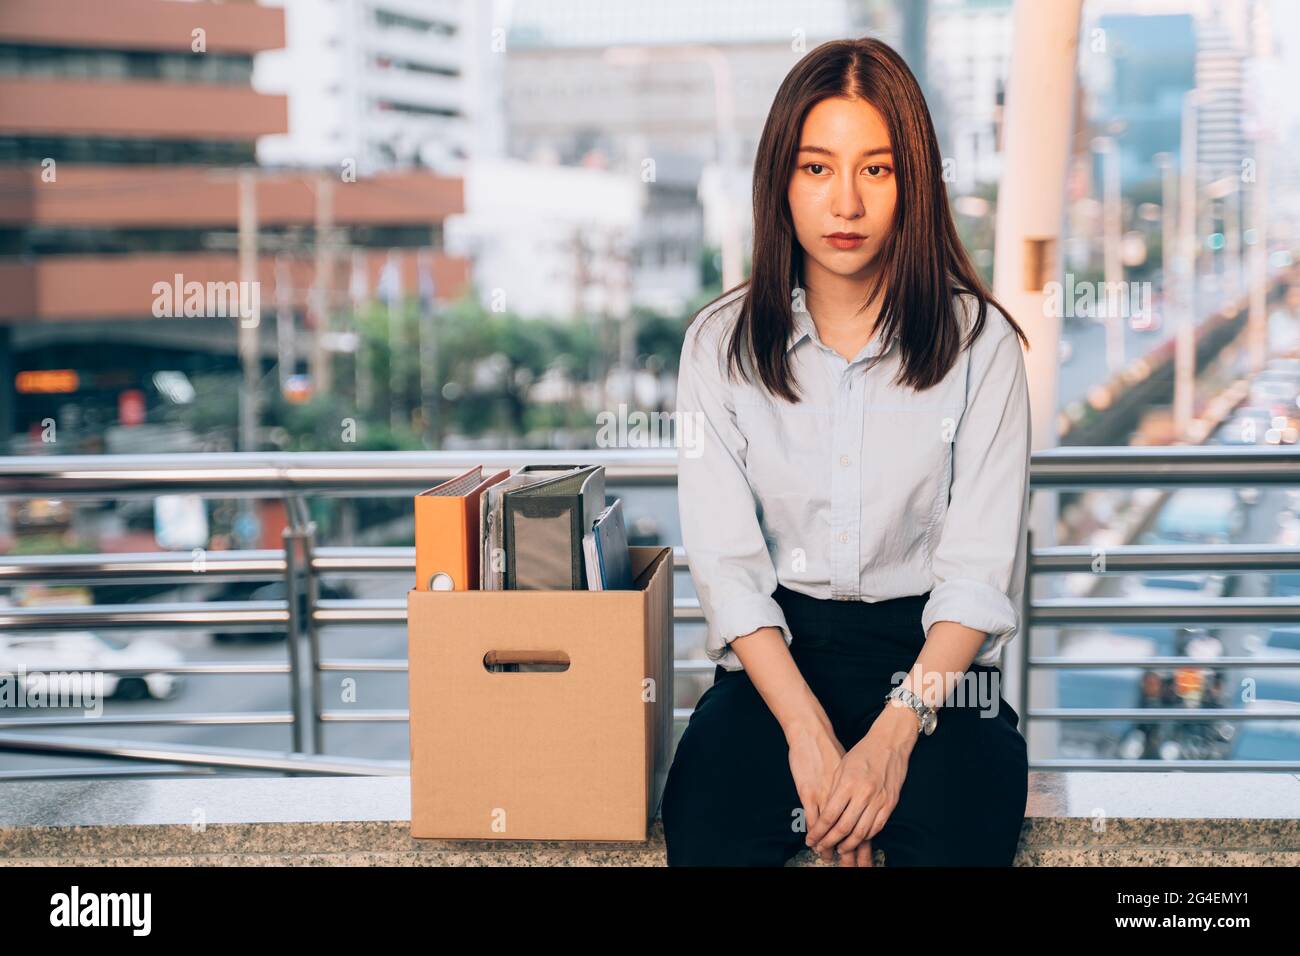 Stressed and worried young Asian woman with box of items sitting alone after being laid off from job due to recession and economic stress in industry Stock Photo